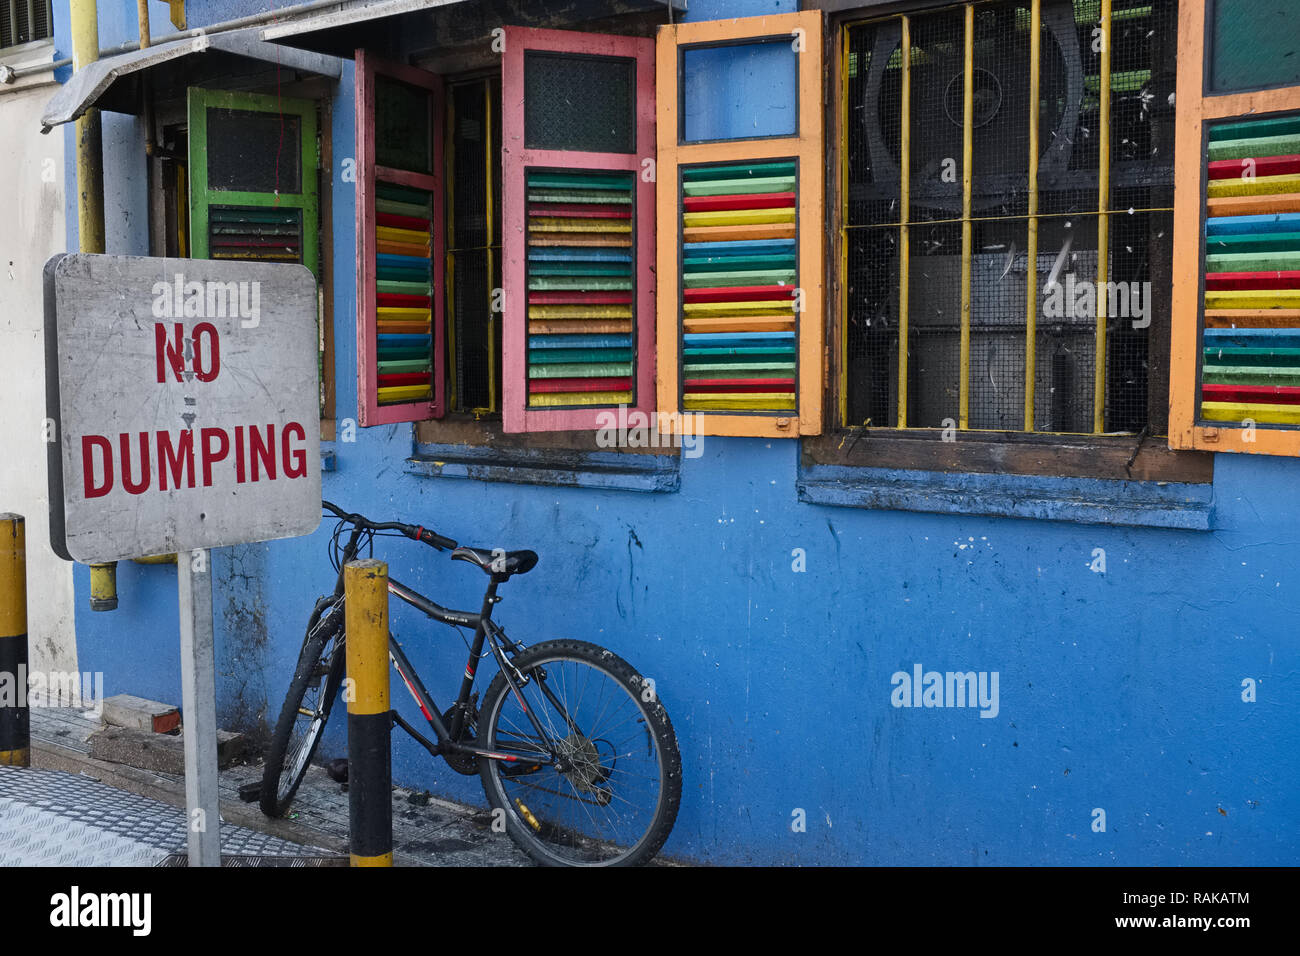 A 'No Dumping' sign in front of a colorful house in Little India, Singapore, an area more prone to littering than others Stock Photo